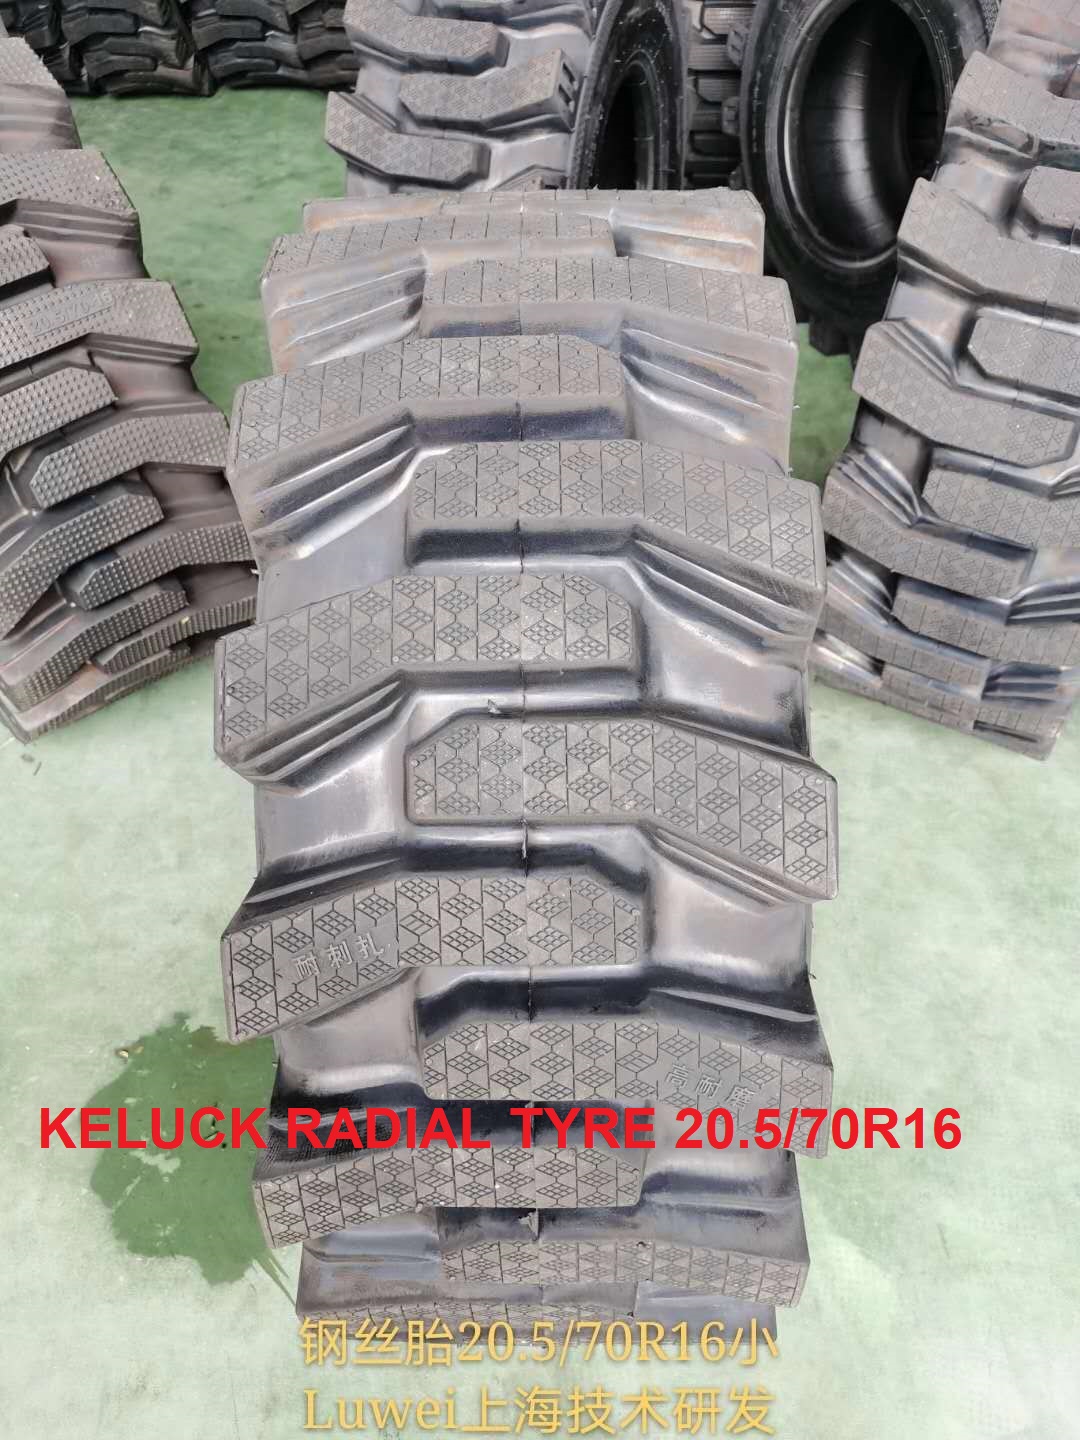 radial small loader tyres 20.5/70R16 16/70R20 16/70R24